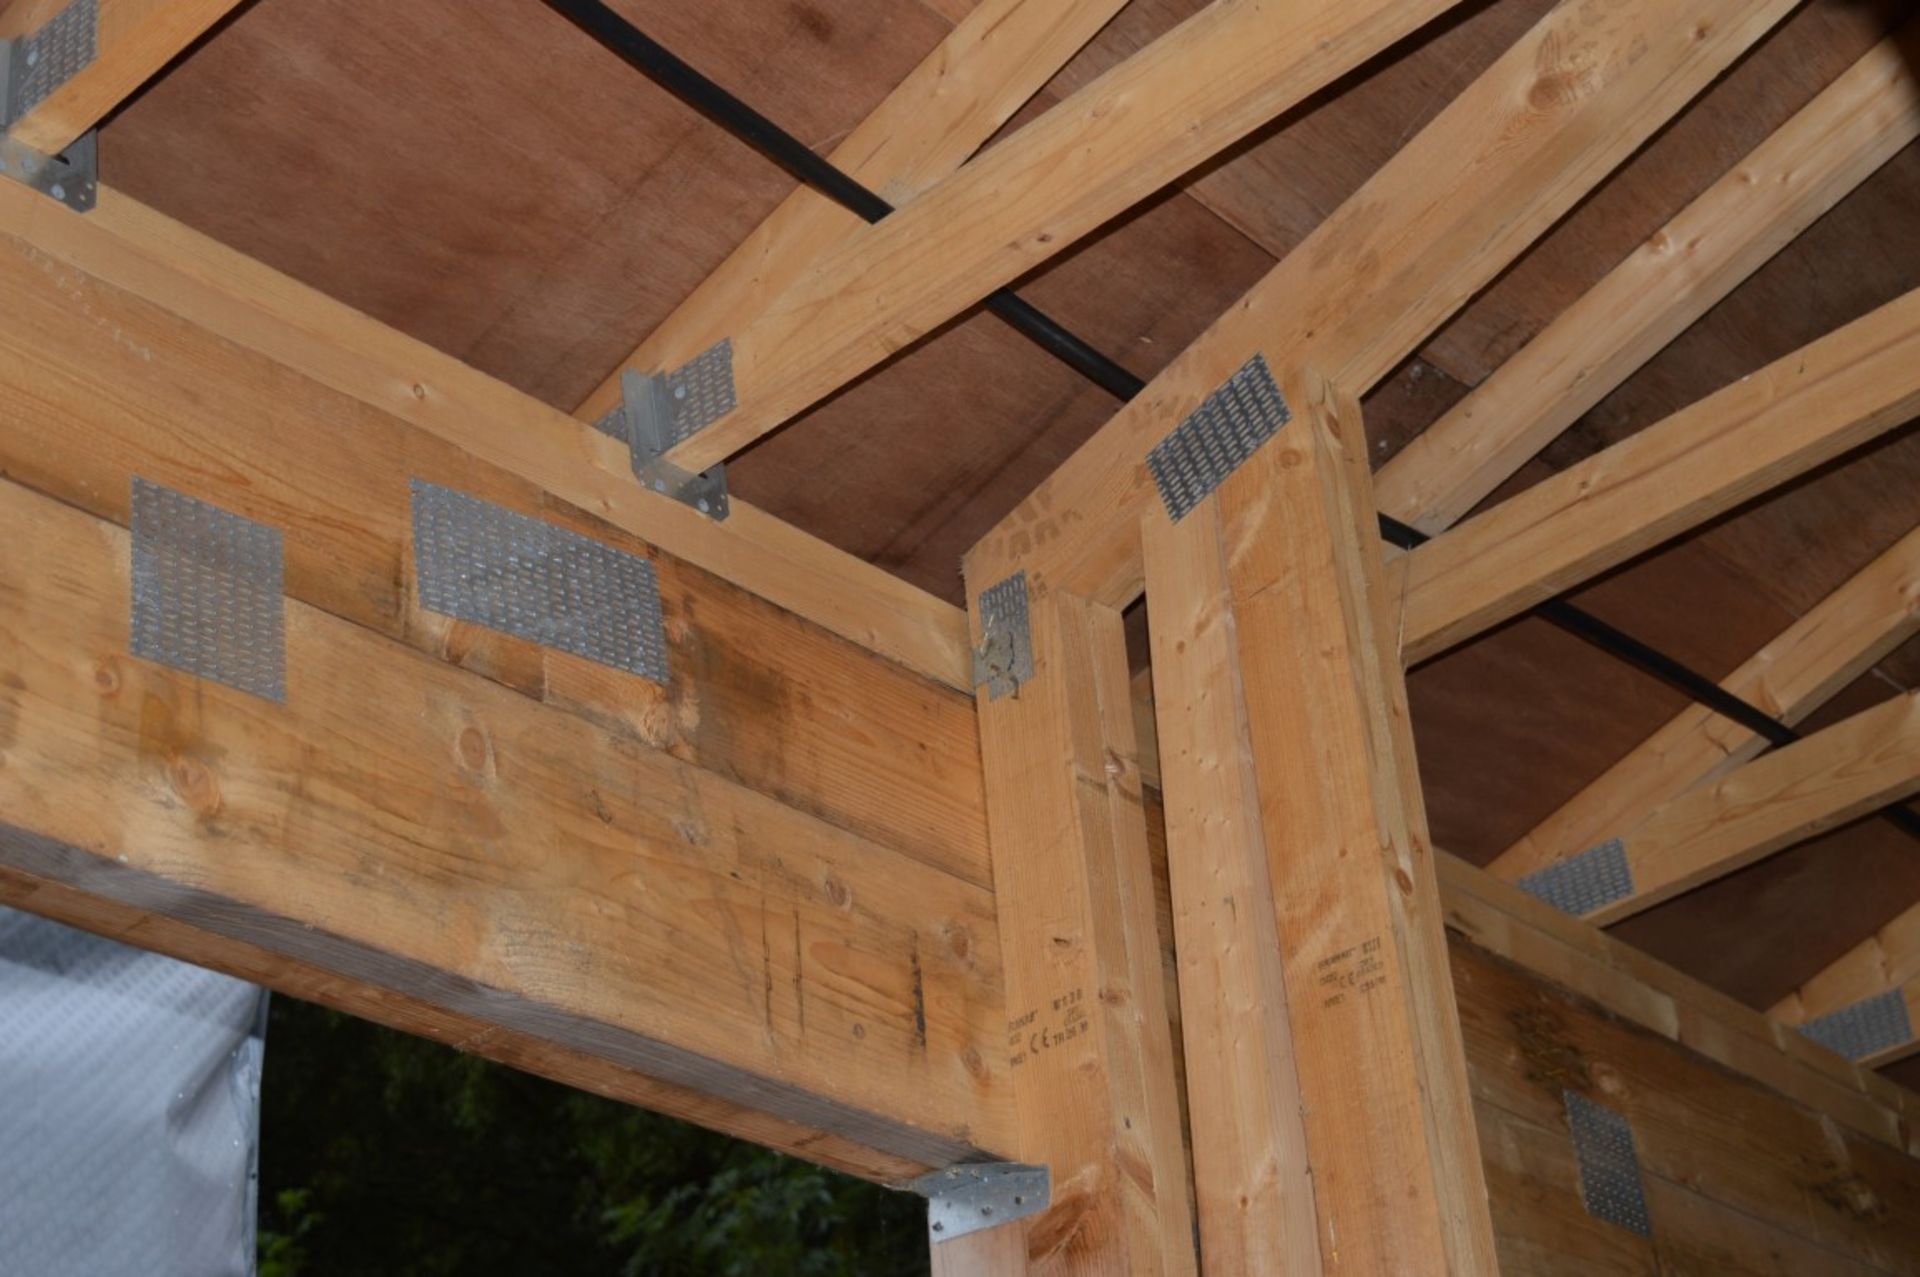 1 x Large Purpose Built Canopy Shed - Super Chord Purlin Construction With OSB Felted Roof - - Image 9 of 9